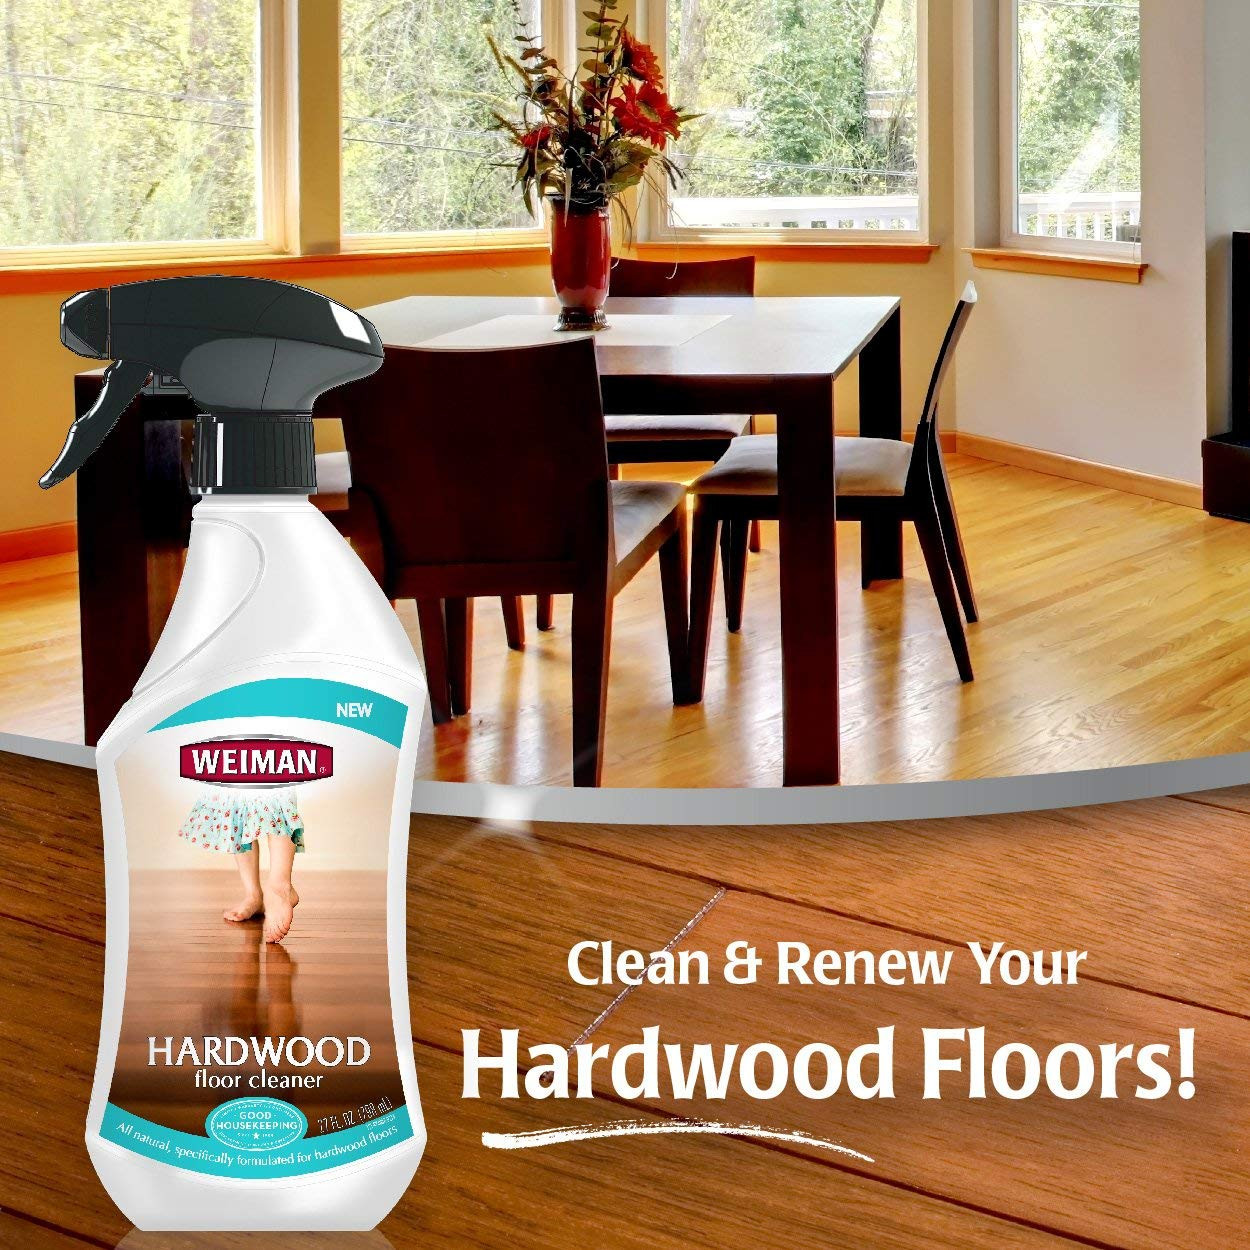 30 Awesome Hardwood Floor Buffing Pads 2024 free download hardwood floor buffing pads of amazon com weiman hardwood floor cleaner surface safe no harsh throughout amazon com weiman hardwood floor cleaner surface safe no harsh scent safe for use aro